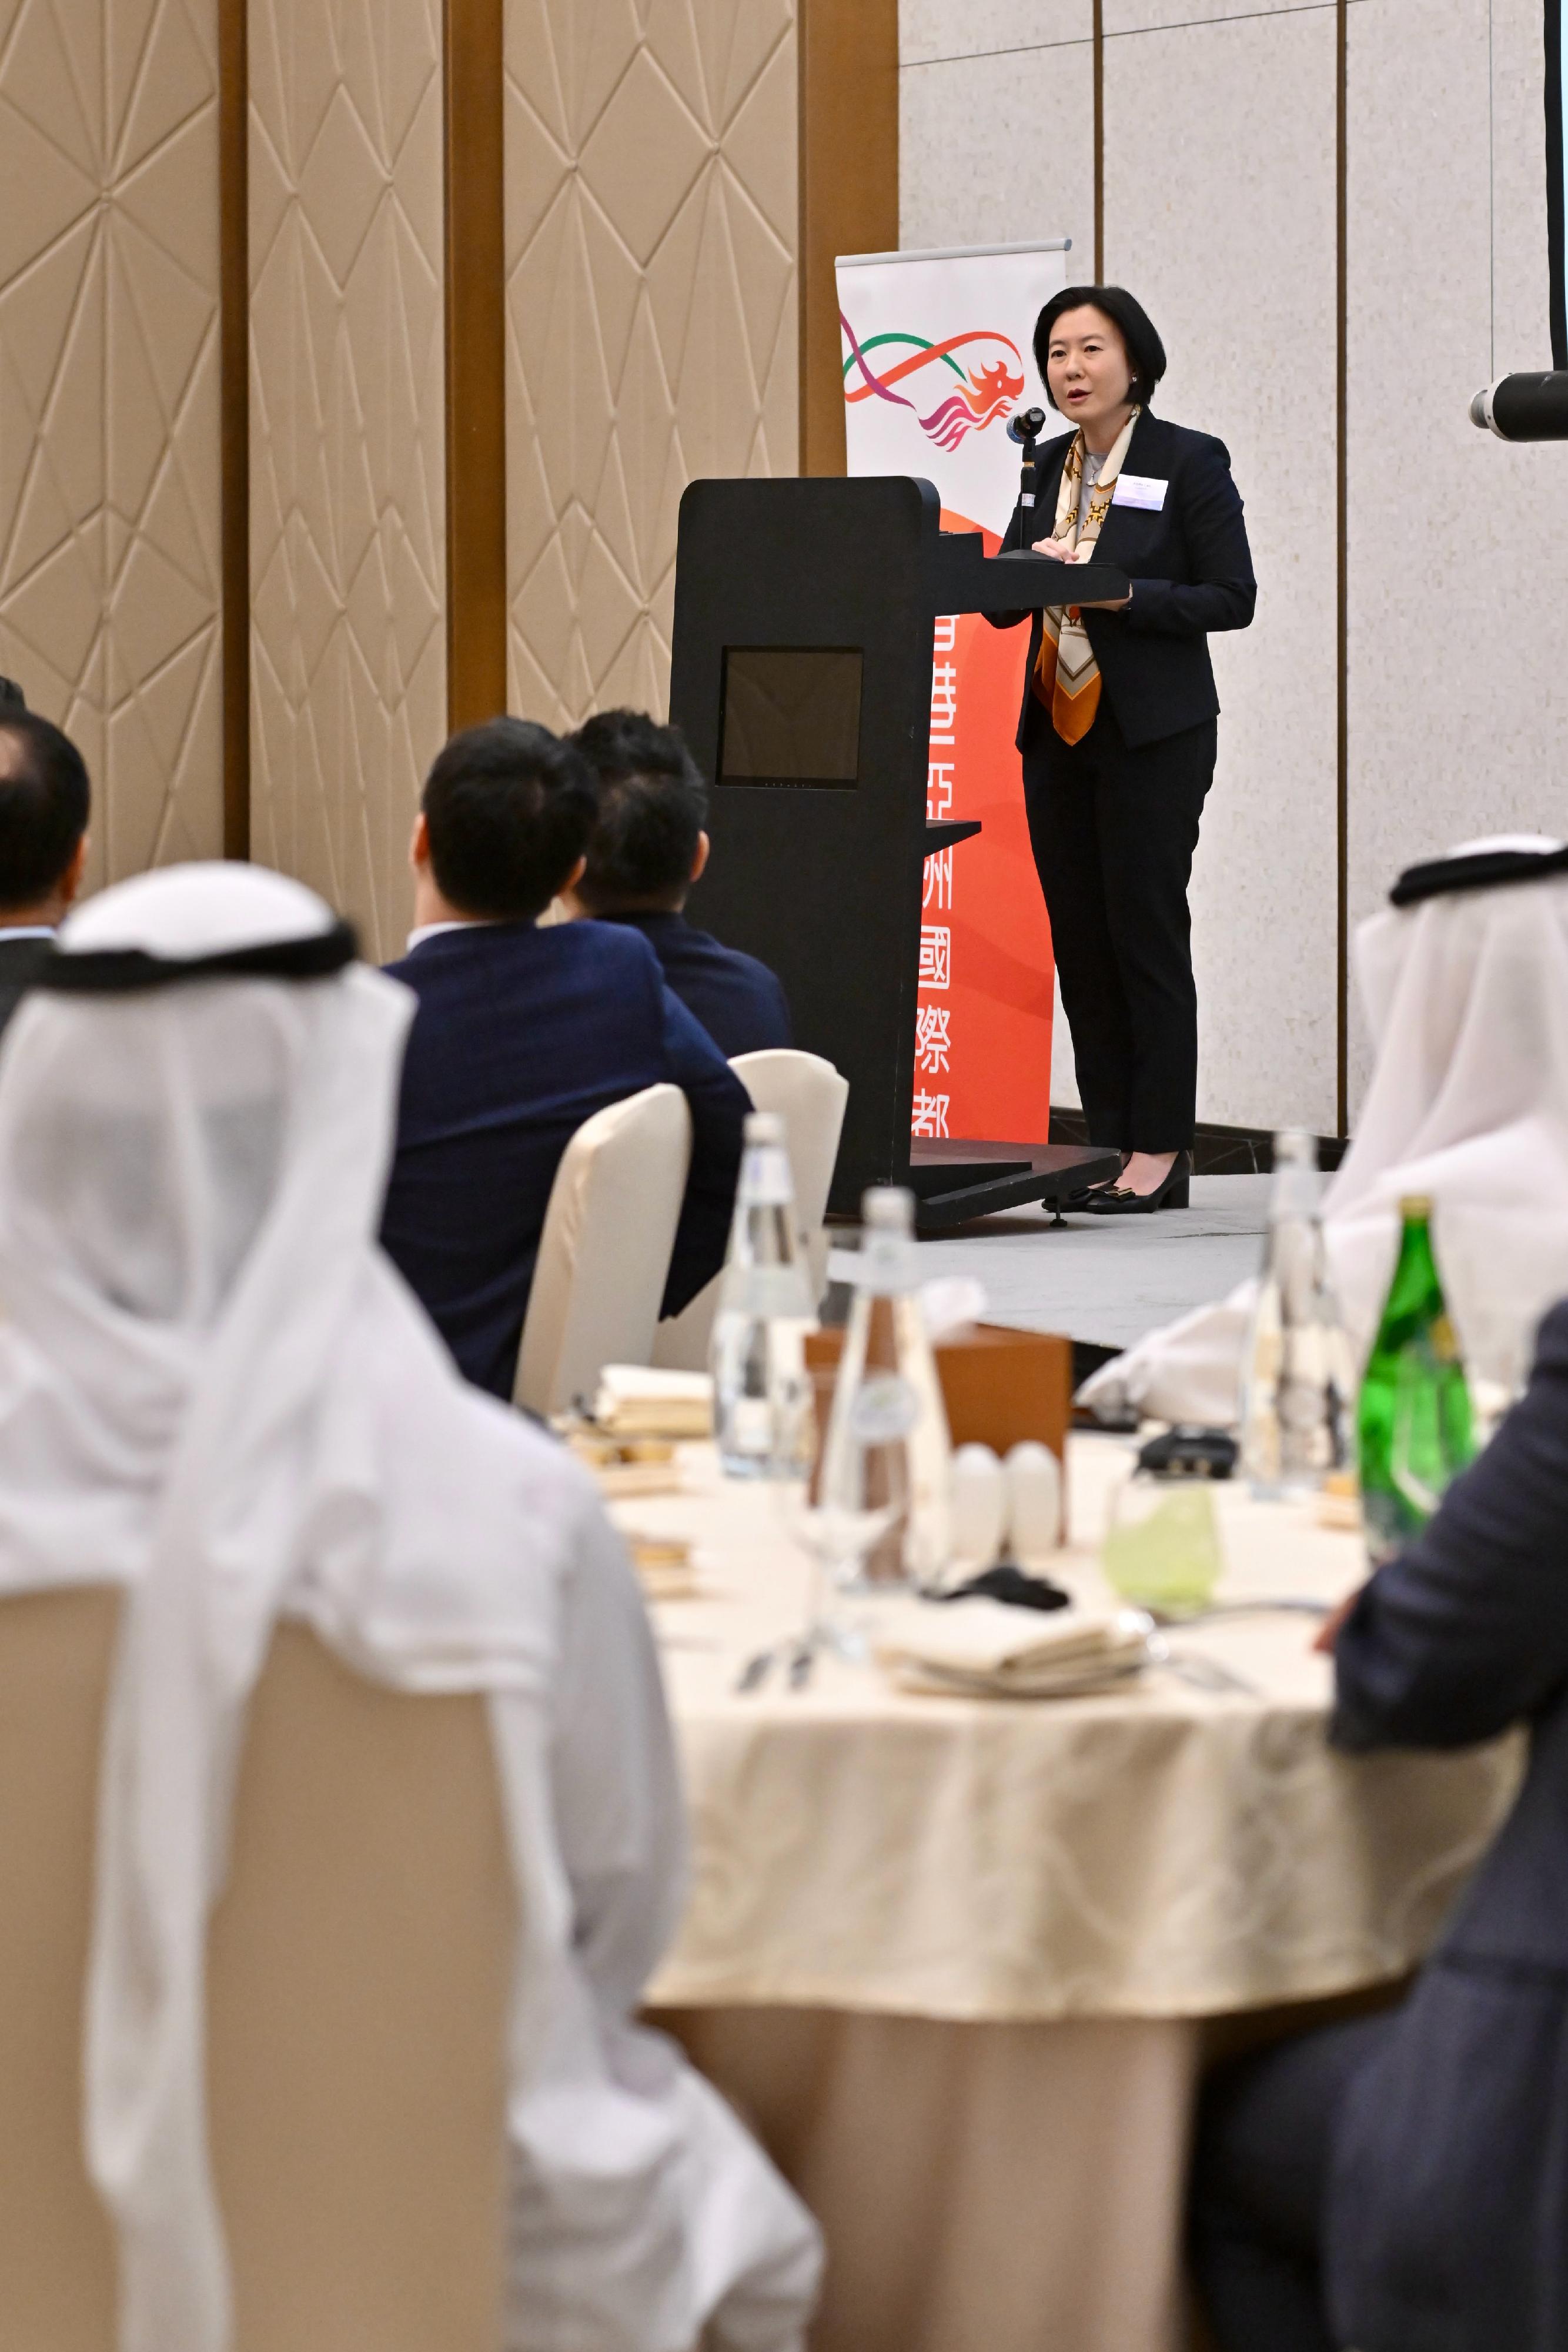 The Secretary for Justice, Mr Paul Lam, SC, arrived in Riyadh, Saudi Arabia, today (May 19, Riyadh time) with his about 30-person delegation, comprising representatives from the Law Society of Hong Kong, the Hong Kong Bar Association, the Hong Kong Exchanges and Clearing Limited, Invest Hong Kong and related sectors, and began a two-day visit to the city. Photo shows the Director-General of Investment Promotion, Ms Alpha Lau, delivering her speech at a lunch and networking reception titled "Hong Kong – The Common Law Gateway for Saudi Arabia Businesses to China and Beyond", co-organised by the Department of Justice, the Hong Kong Economic and Trade Office in Dubai, the Hong Kong Trade Development Council and the Saudi Chinese Business Council, and supported by Invest Hong Kong.
 